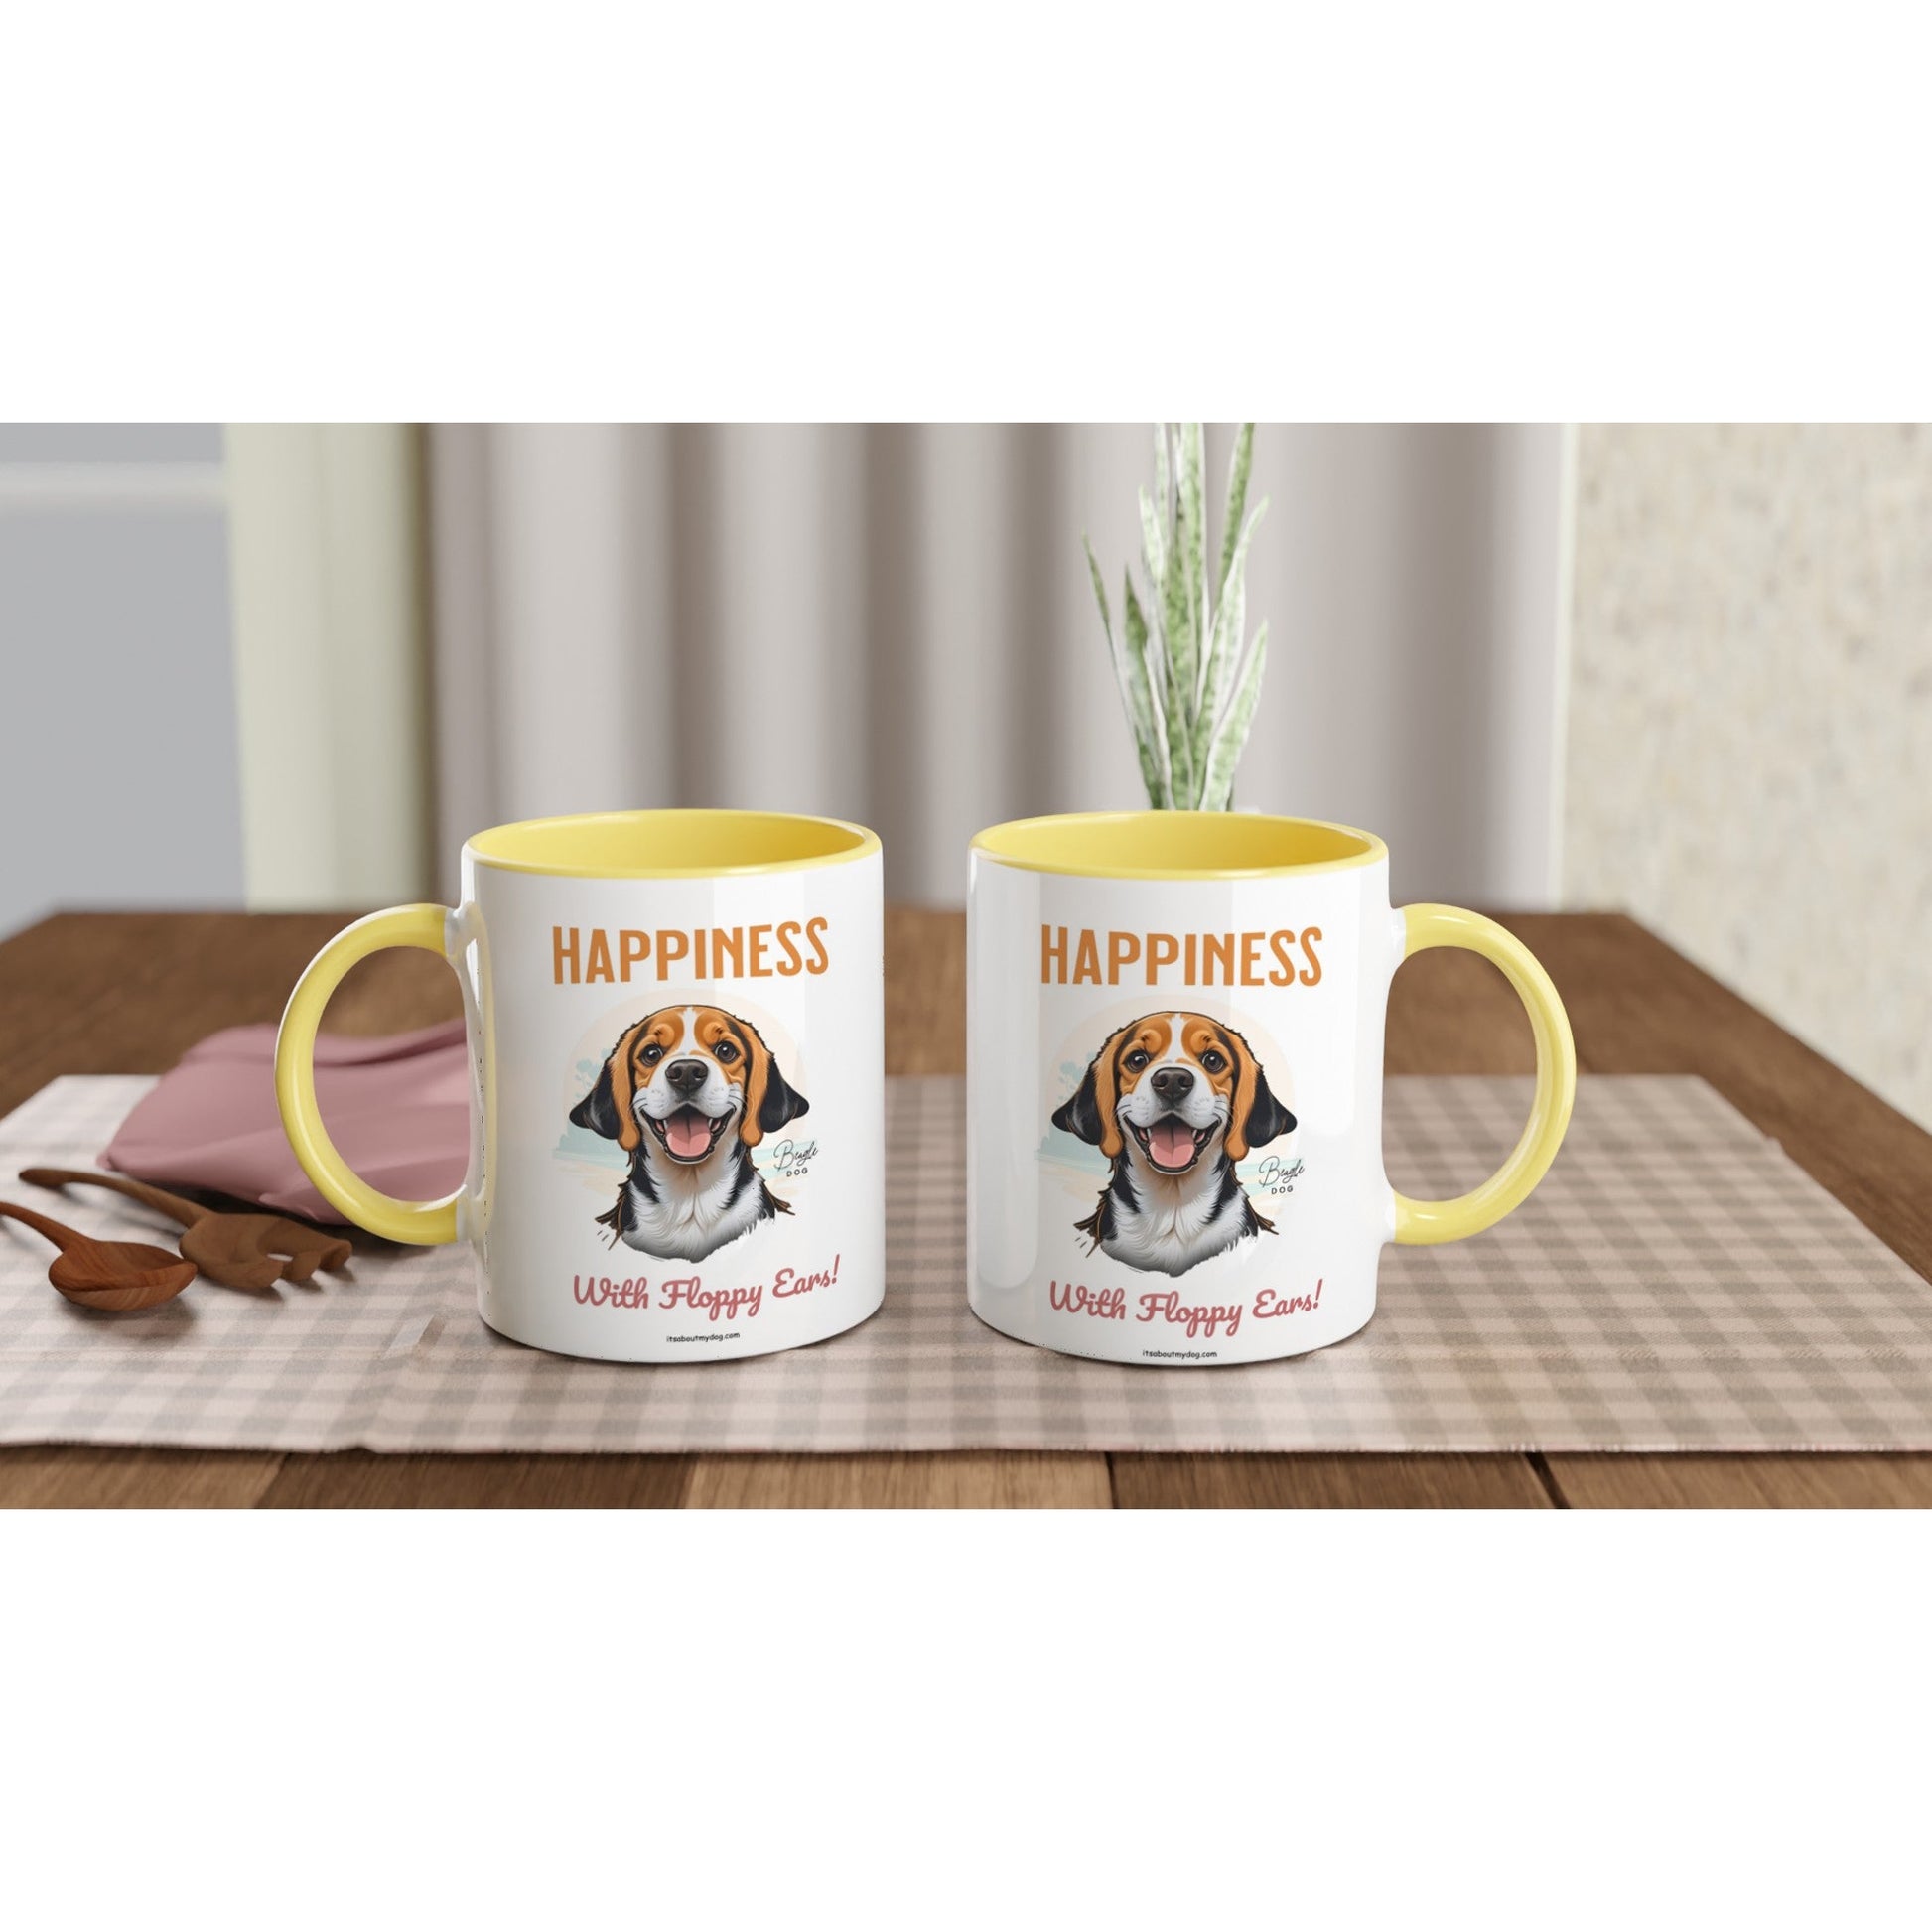 Beagle-11oz Ceramic Mug17.99-(FREE Delivery) Shop now at itsaboutmydog.com, Beagle, Beagle Dog, beagle dogs lovers, Beagle gift for her, beagle gift ideas, beagle gifts for her, beagle mom gifts, beagle owner gifts, beagle puppies for sale near me, dog mugs, dog mugs uk, gifts for beagle owners